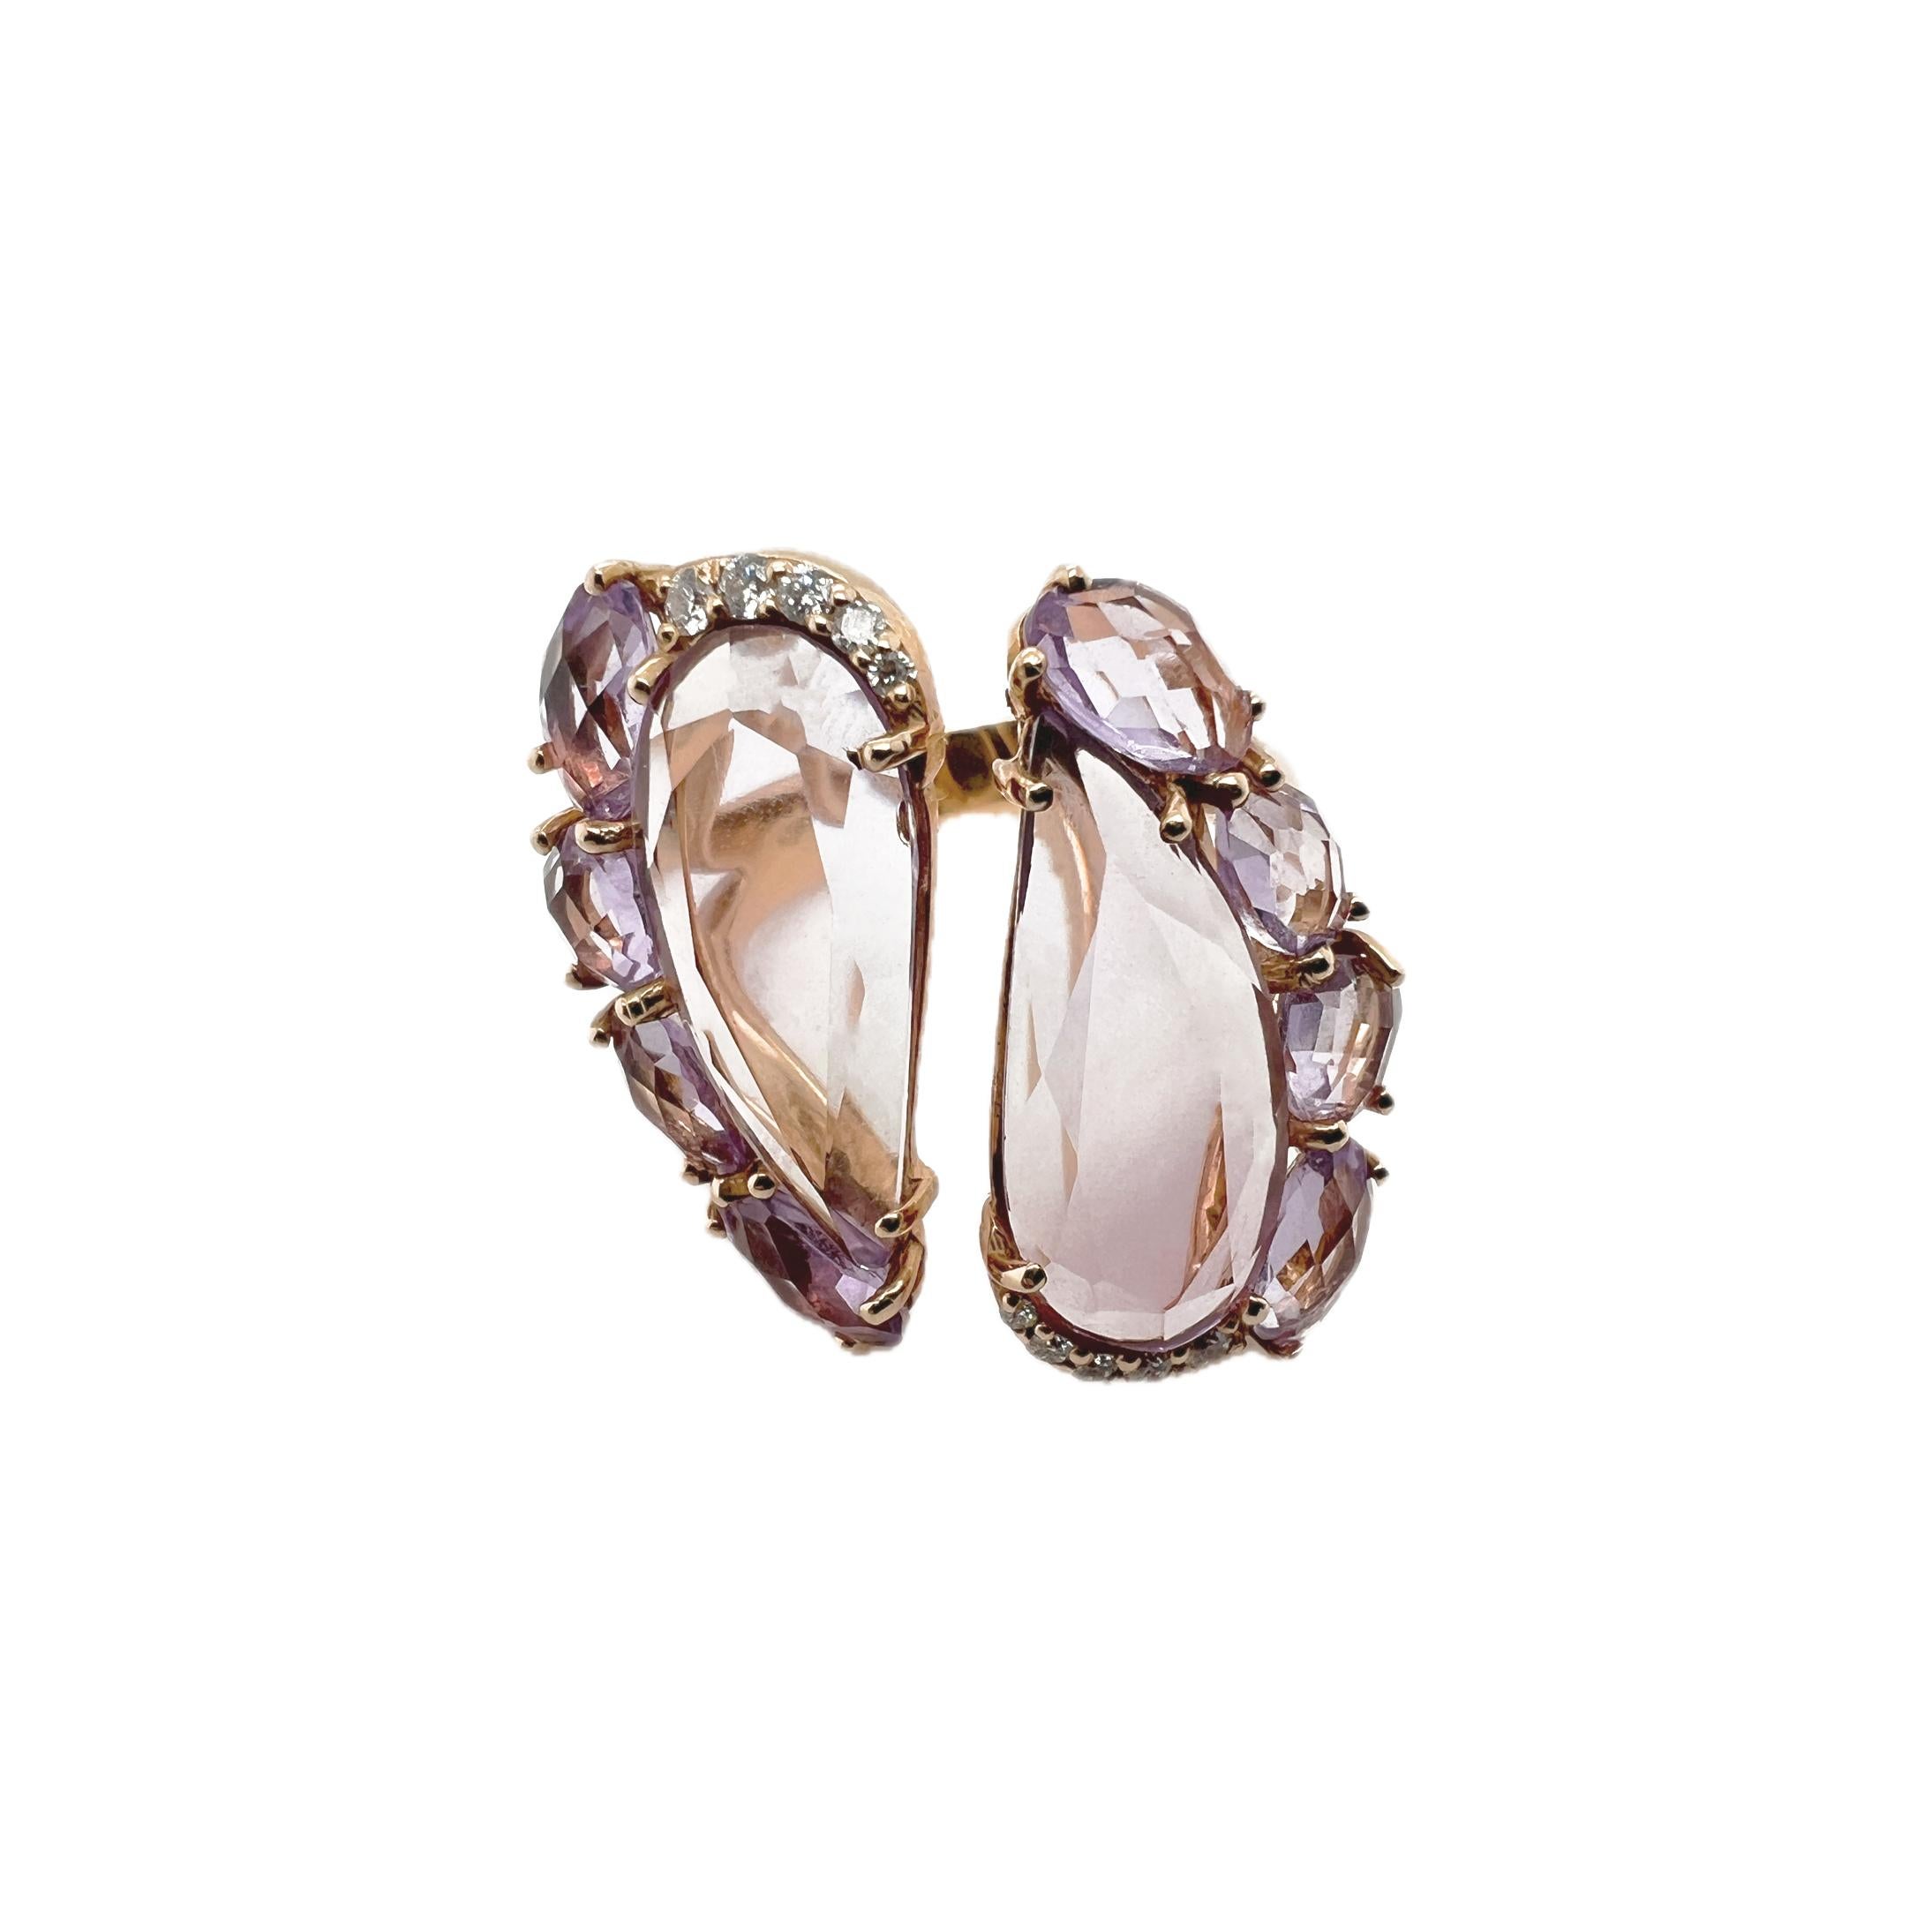 All of our jewellery is made by Italian Artisans to guarantee the Made In Italy manufacturing. 

The 18Kt pink gold ring with Amethyst faceted gems and Diamonds is a beautiful and unique piece of jewelry. PInk gold has a classic and warm look that